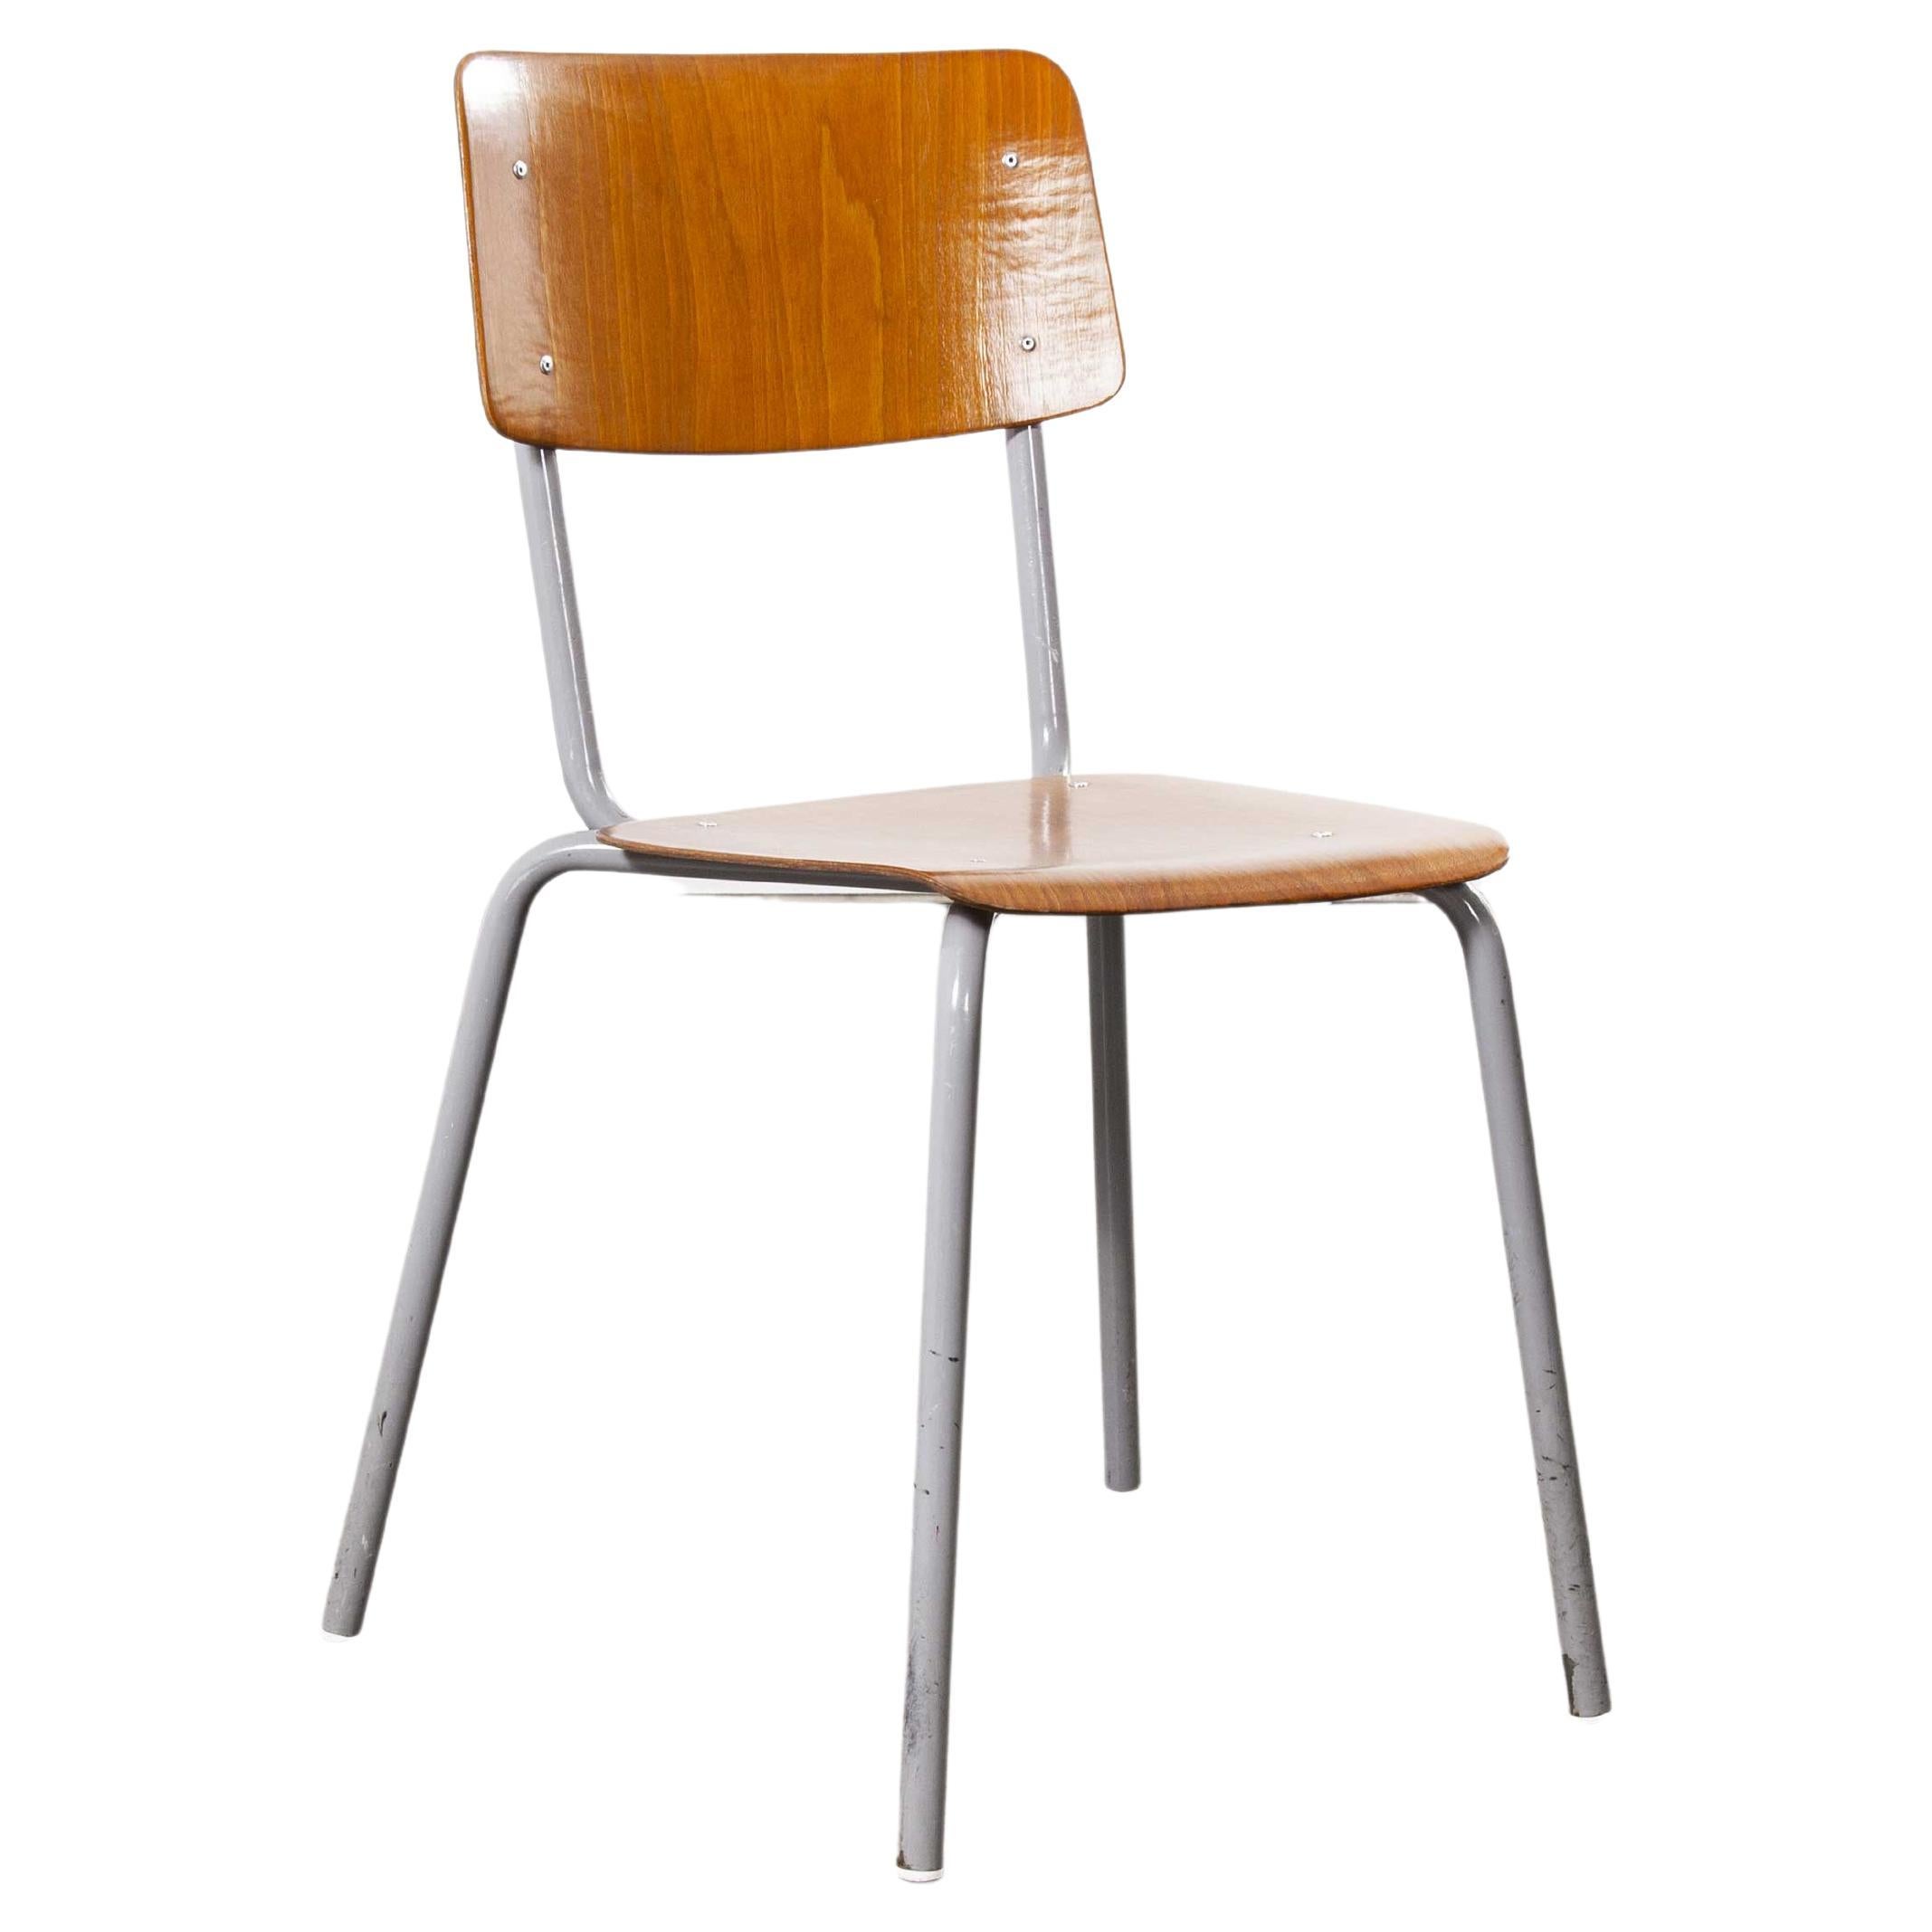 1960’s Berl & Cie Mid Century Stacking Chairs – Pagholz – Last Few Remain For Sale